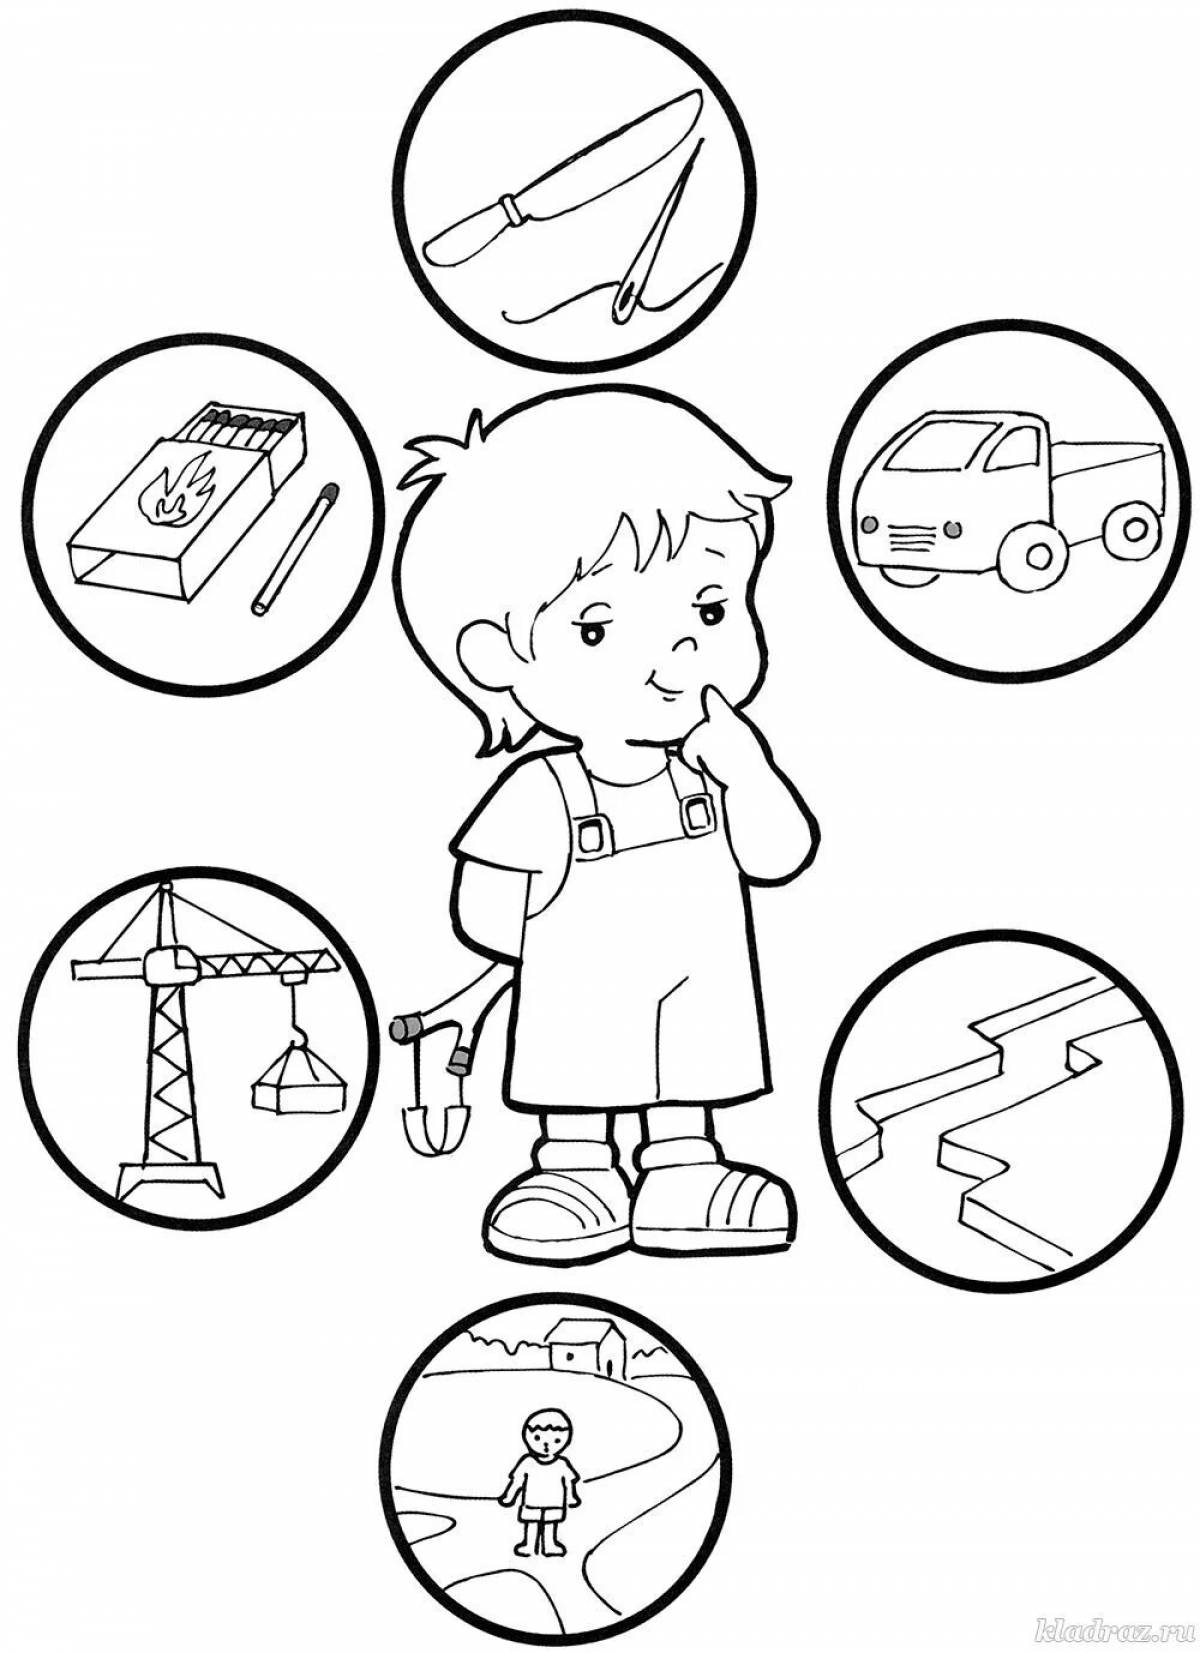 Coloring page humorous safety sign